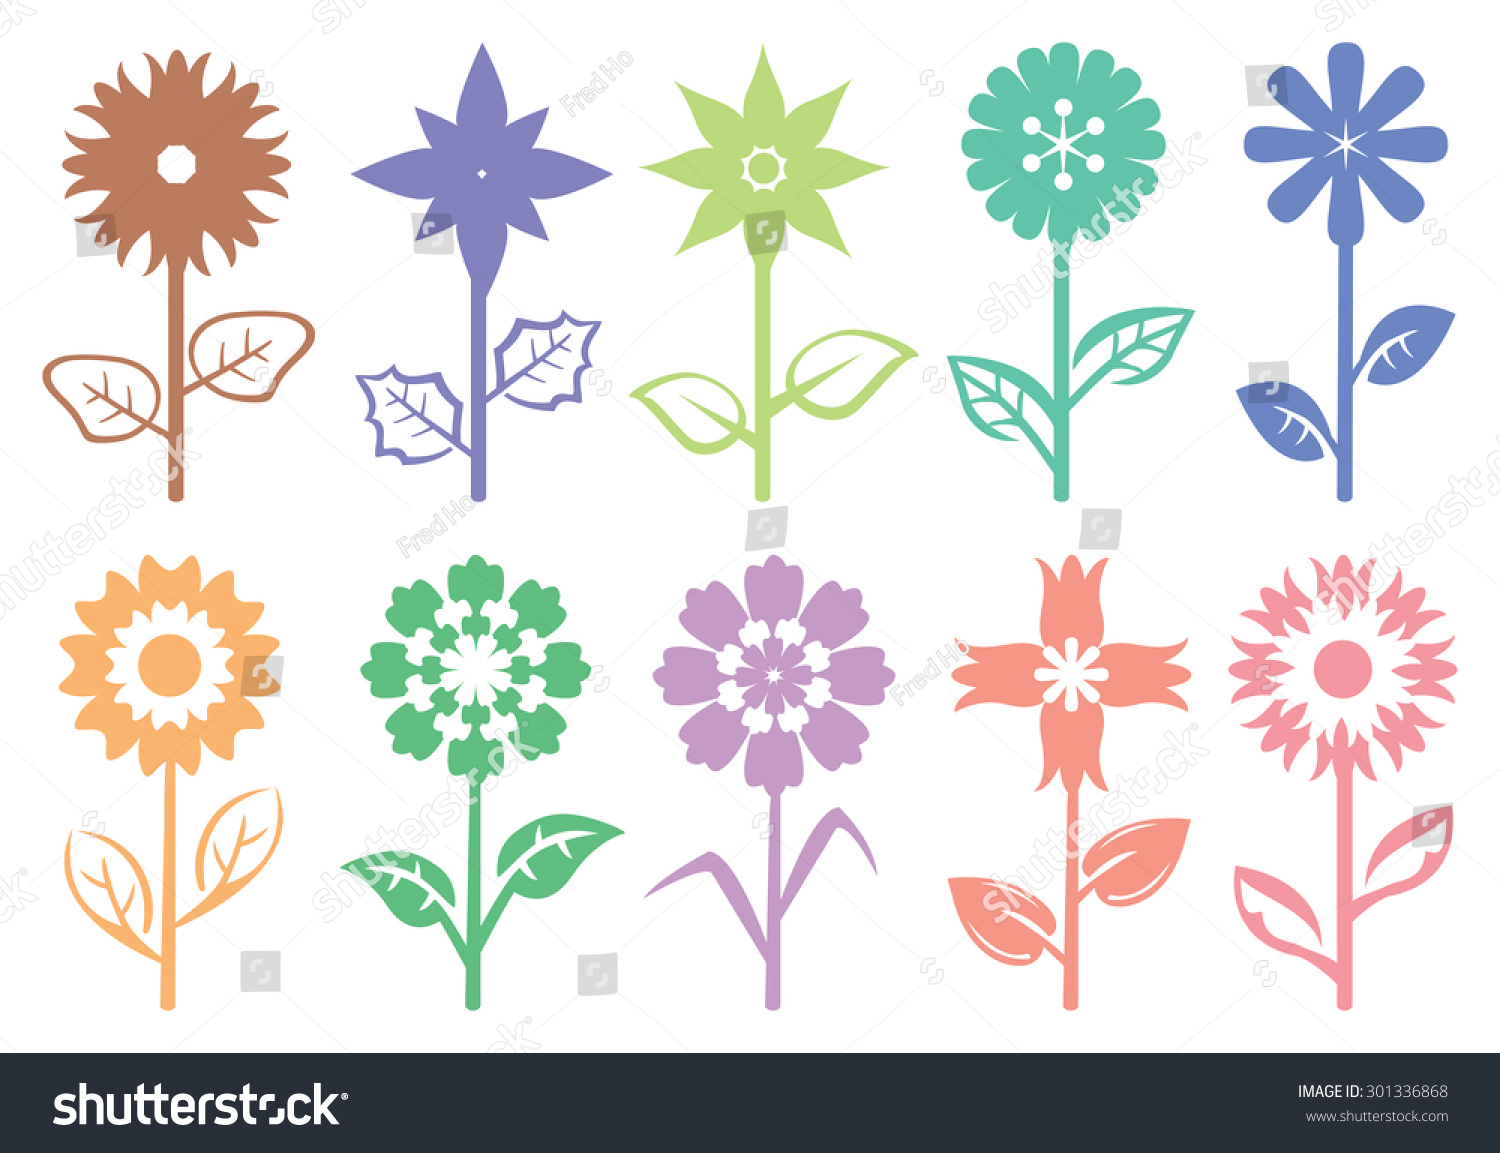 Designs Flowers On Stems Leaves Colorful Stock Vector 301336868